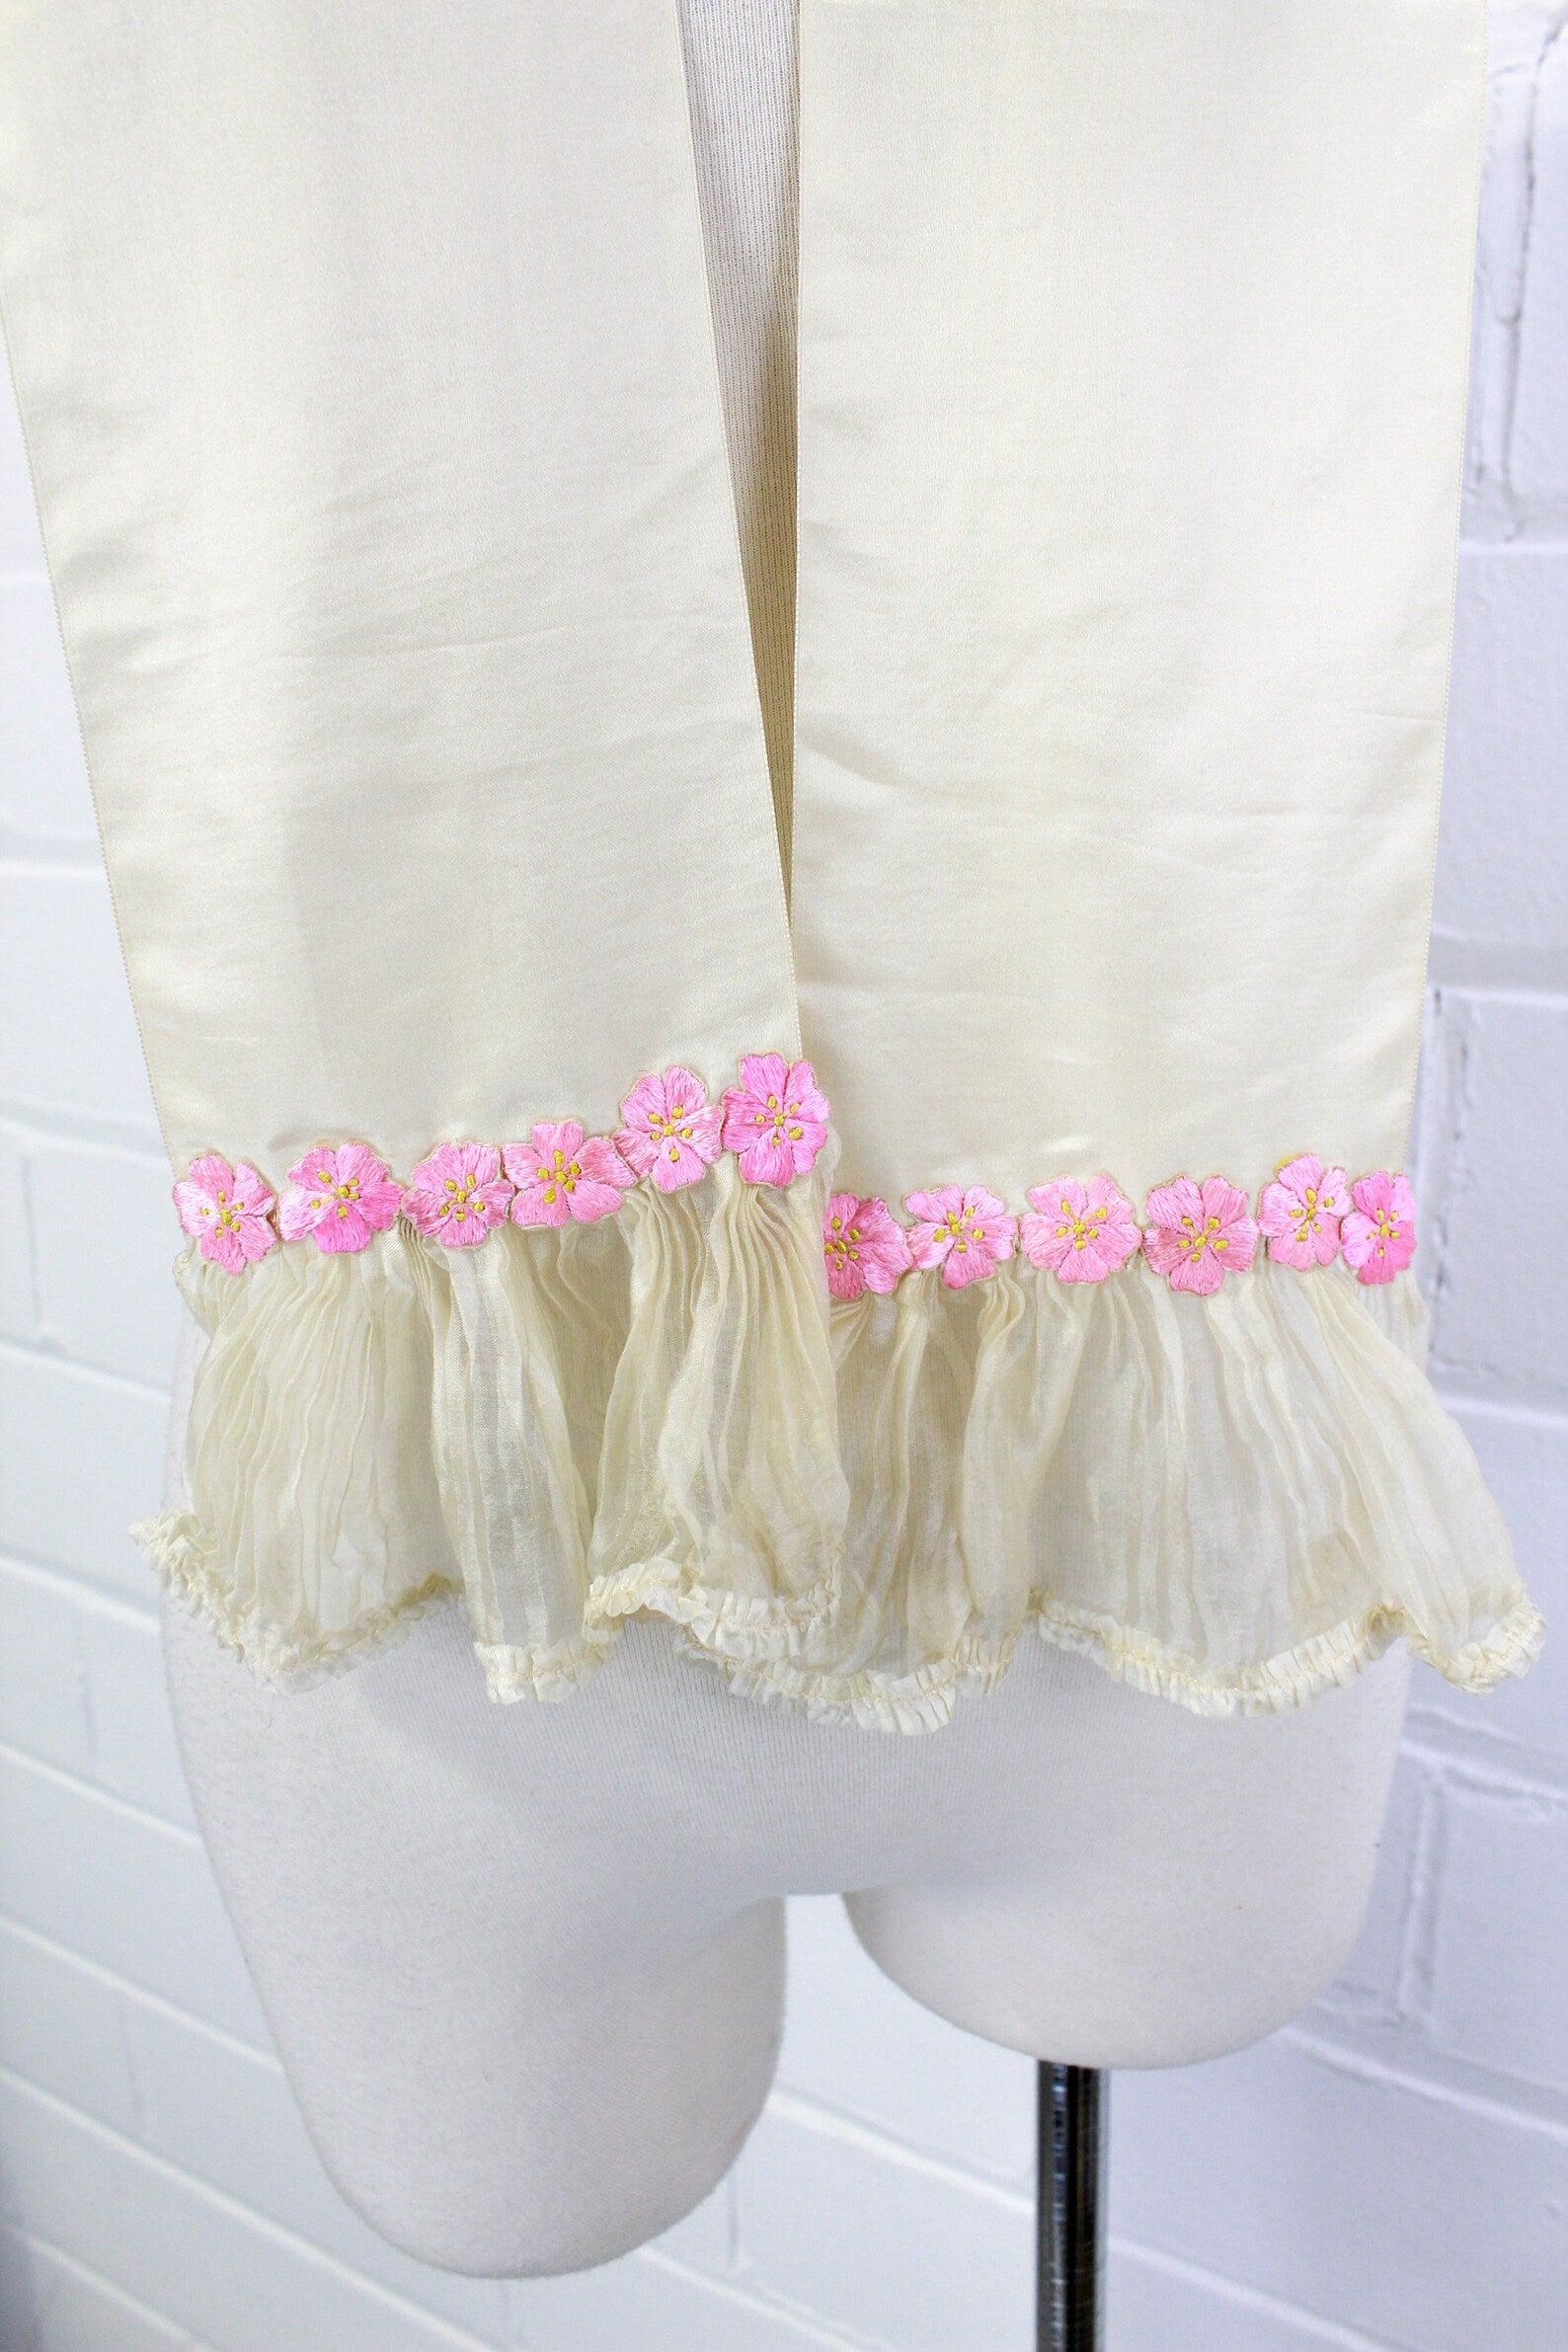 Antique Silk Sash Belt/Scarf with Appliquéd Embroidered Pink Flowers Cherry Blossoms, Pleated Ruffle Ends, 1890s/Early 1900s